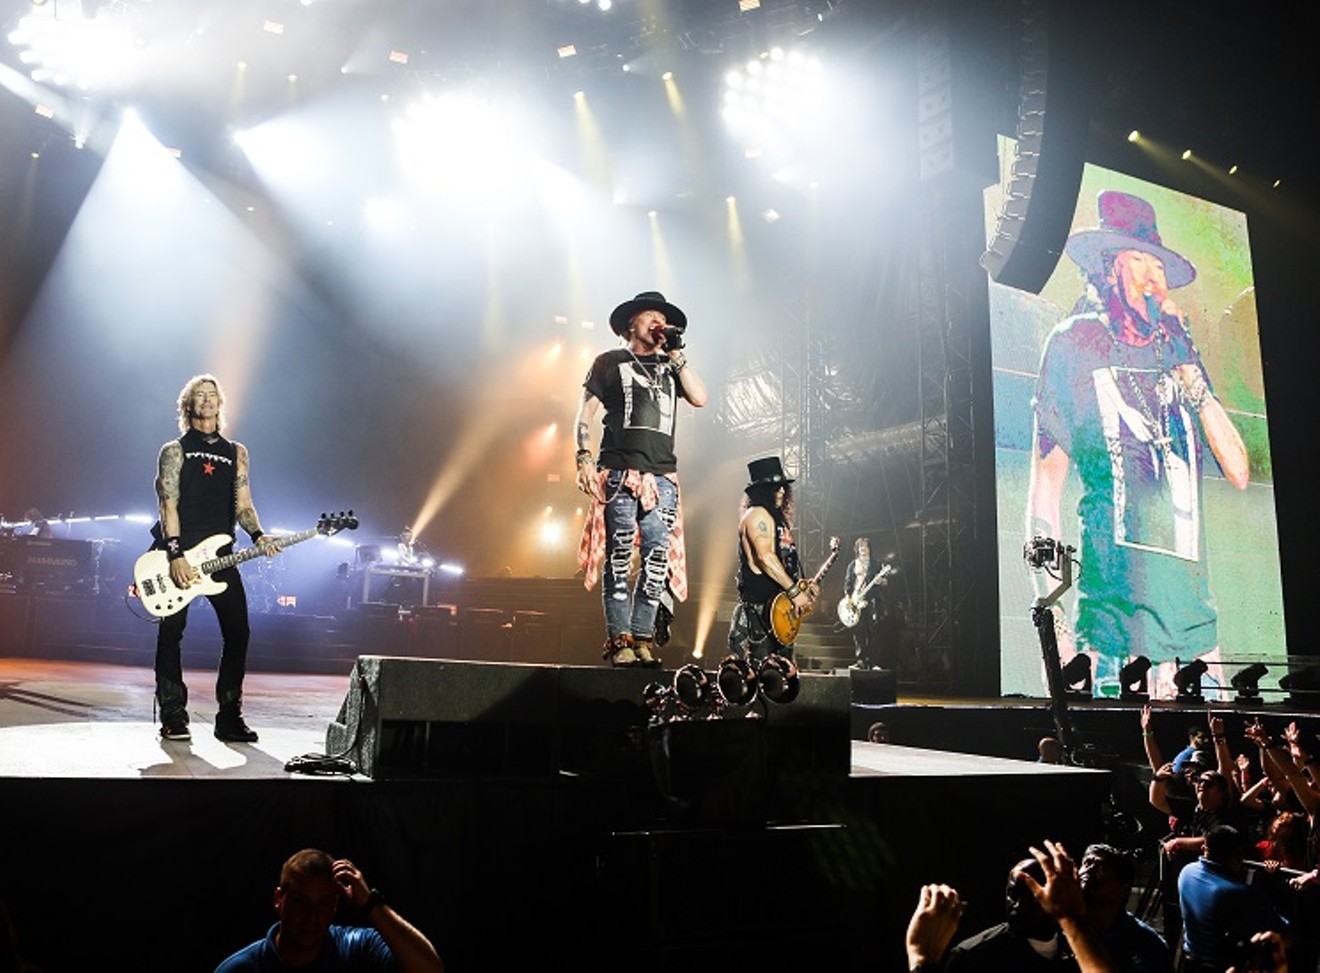 Guns N' Roses absolutely wowed those in attendance at Toyota Center on Friday night.